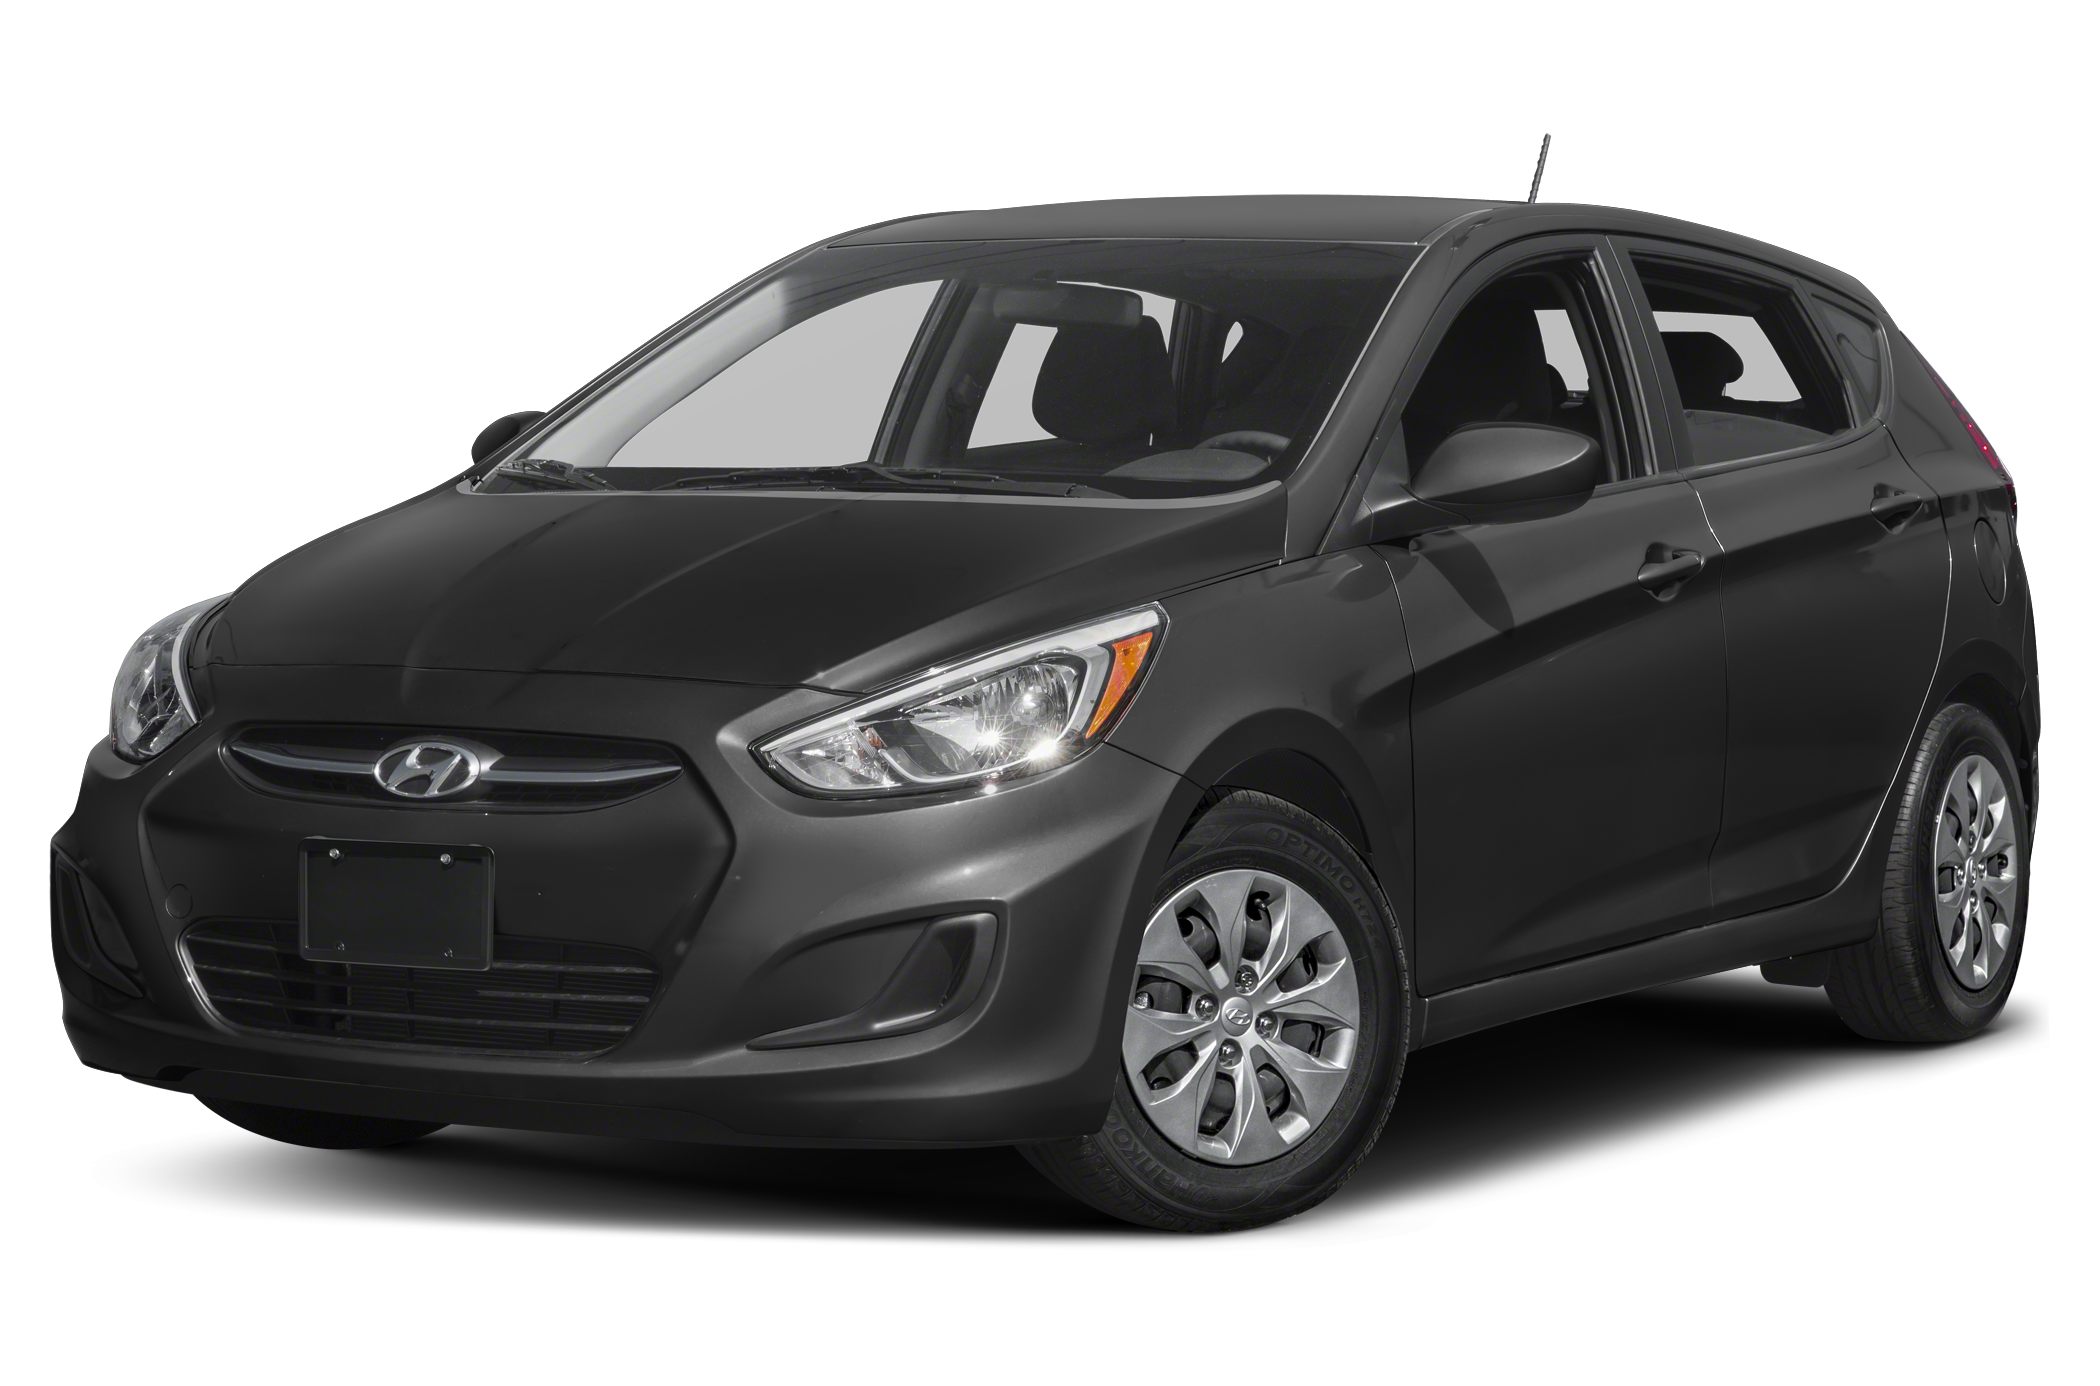 Hyundai Accent Prices, Reviews and New Model Information - Autoblog